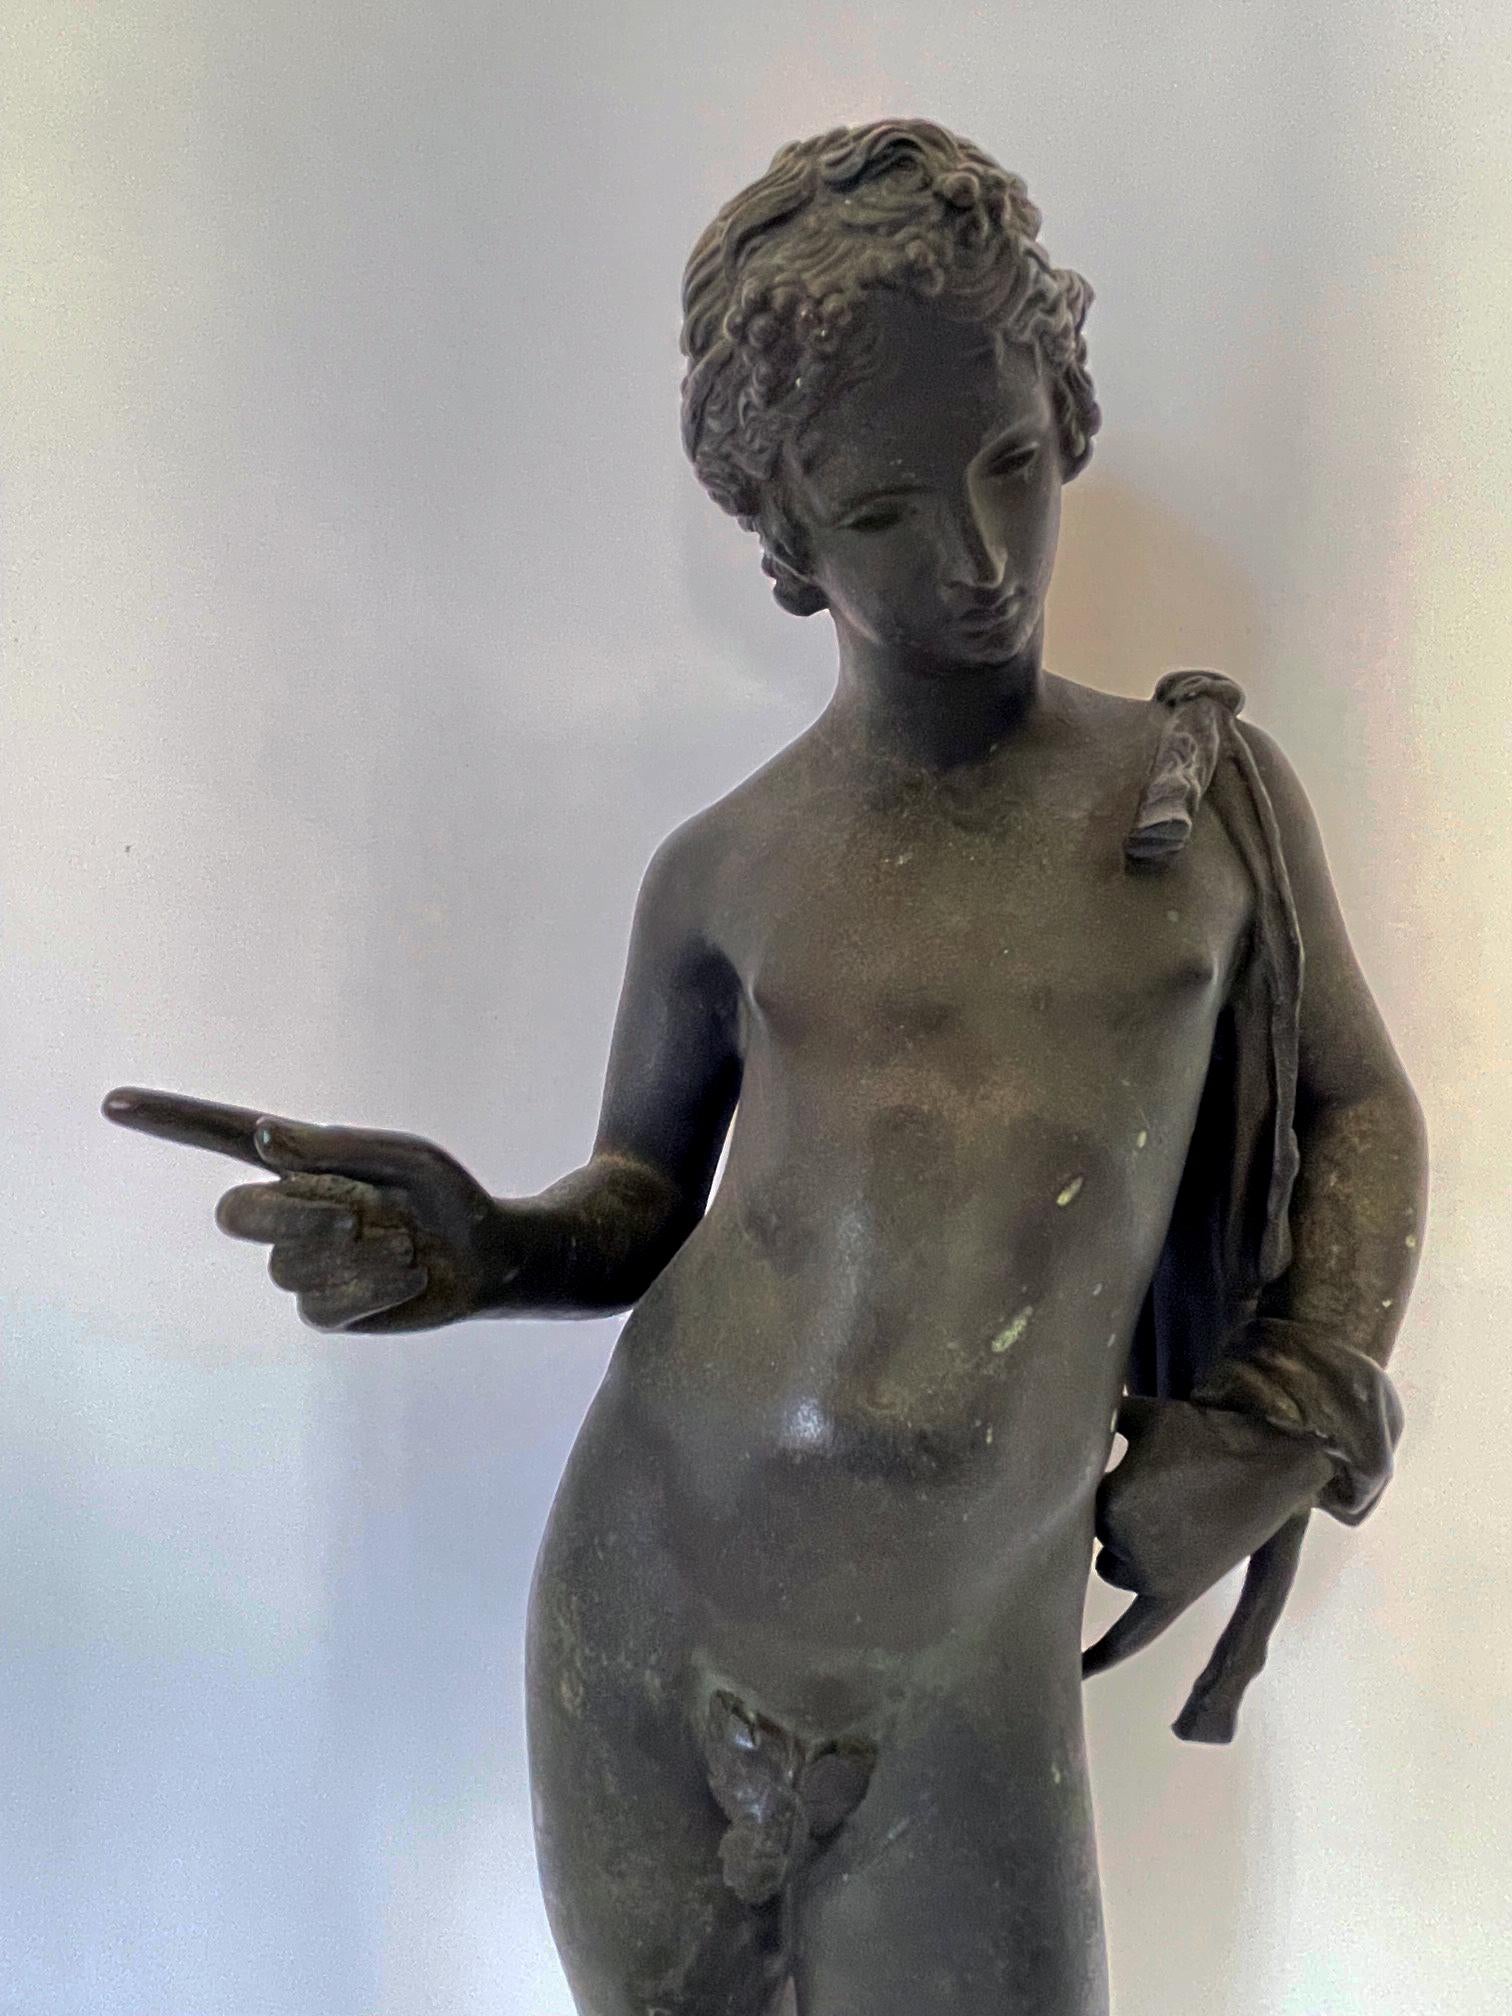 the youth in contrapposto pose with his right arm raised with a goat-skin slung over his left shoulder, his legs slightly apart and wearing sandals. leaning on one hip and looking downwards at his reflection; the original figure discovered in